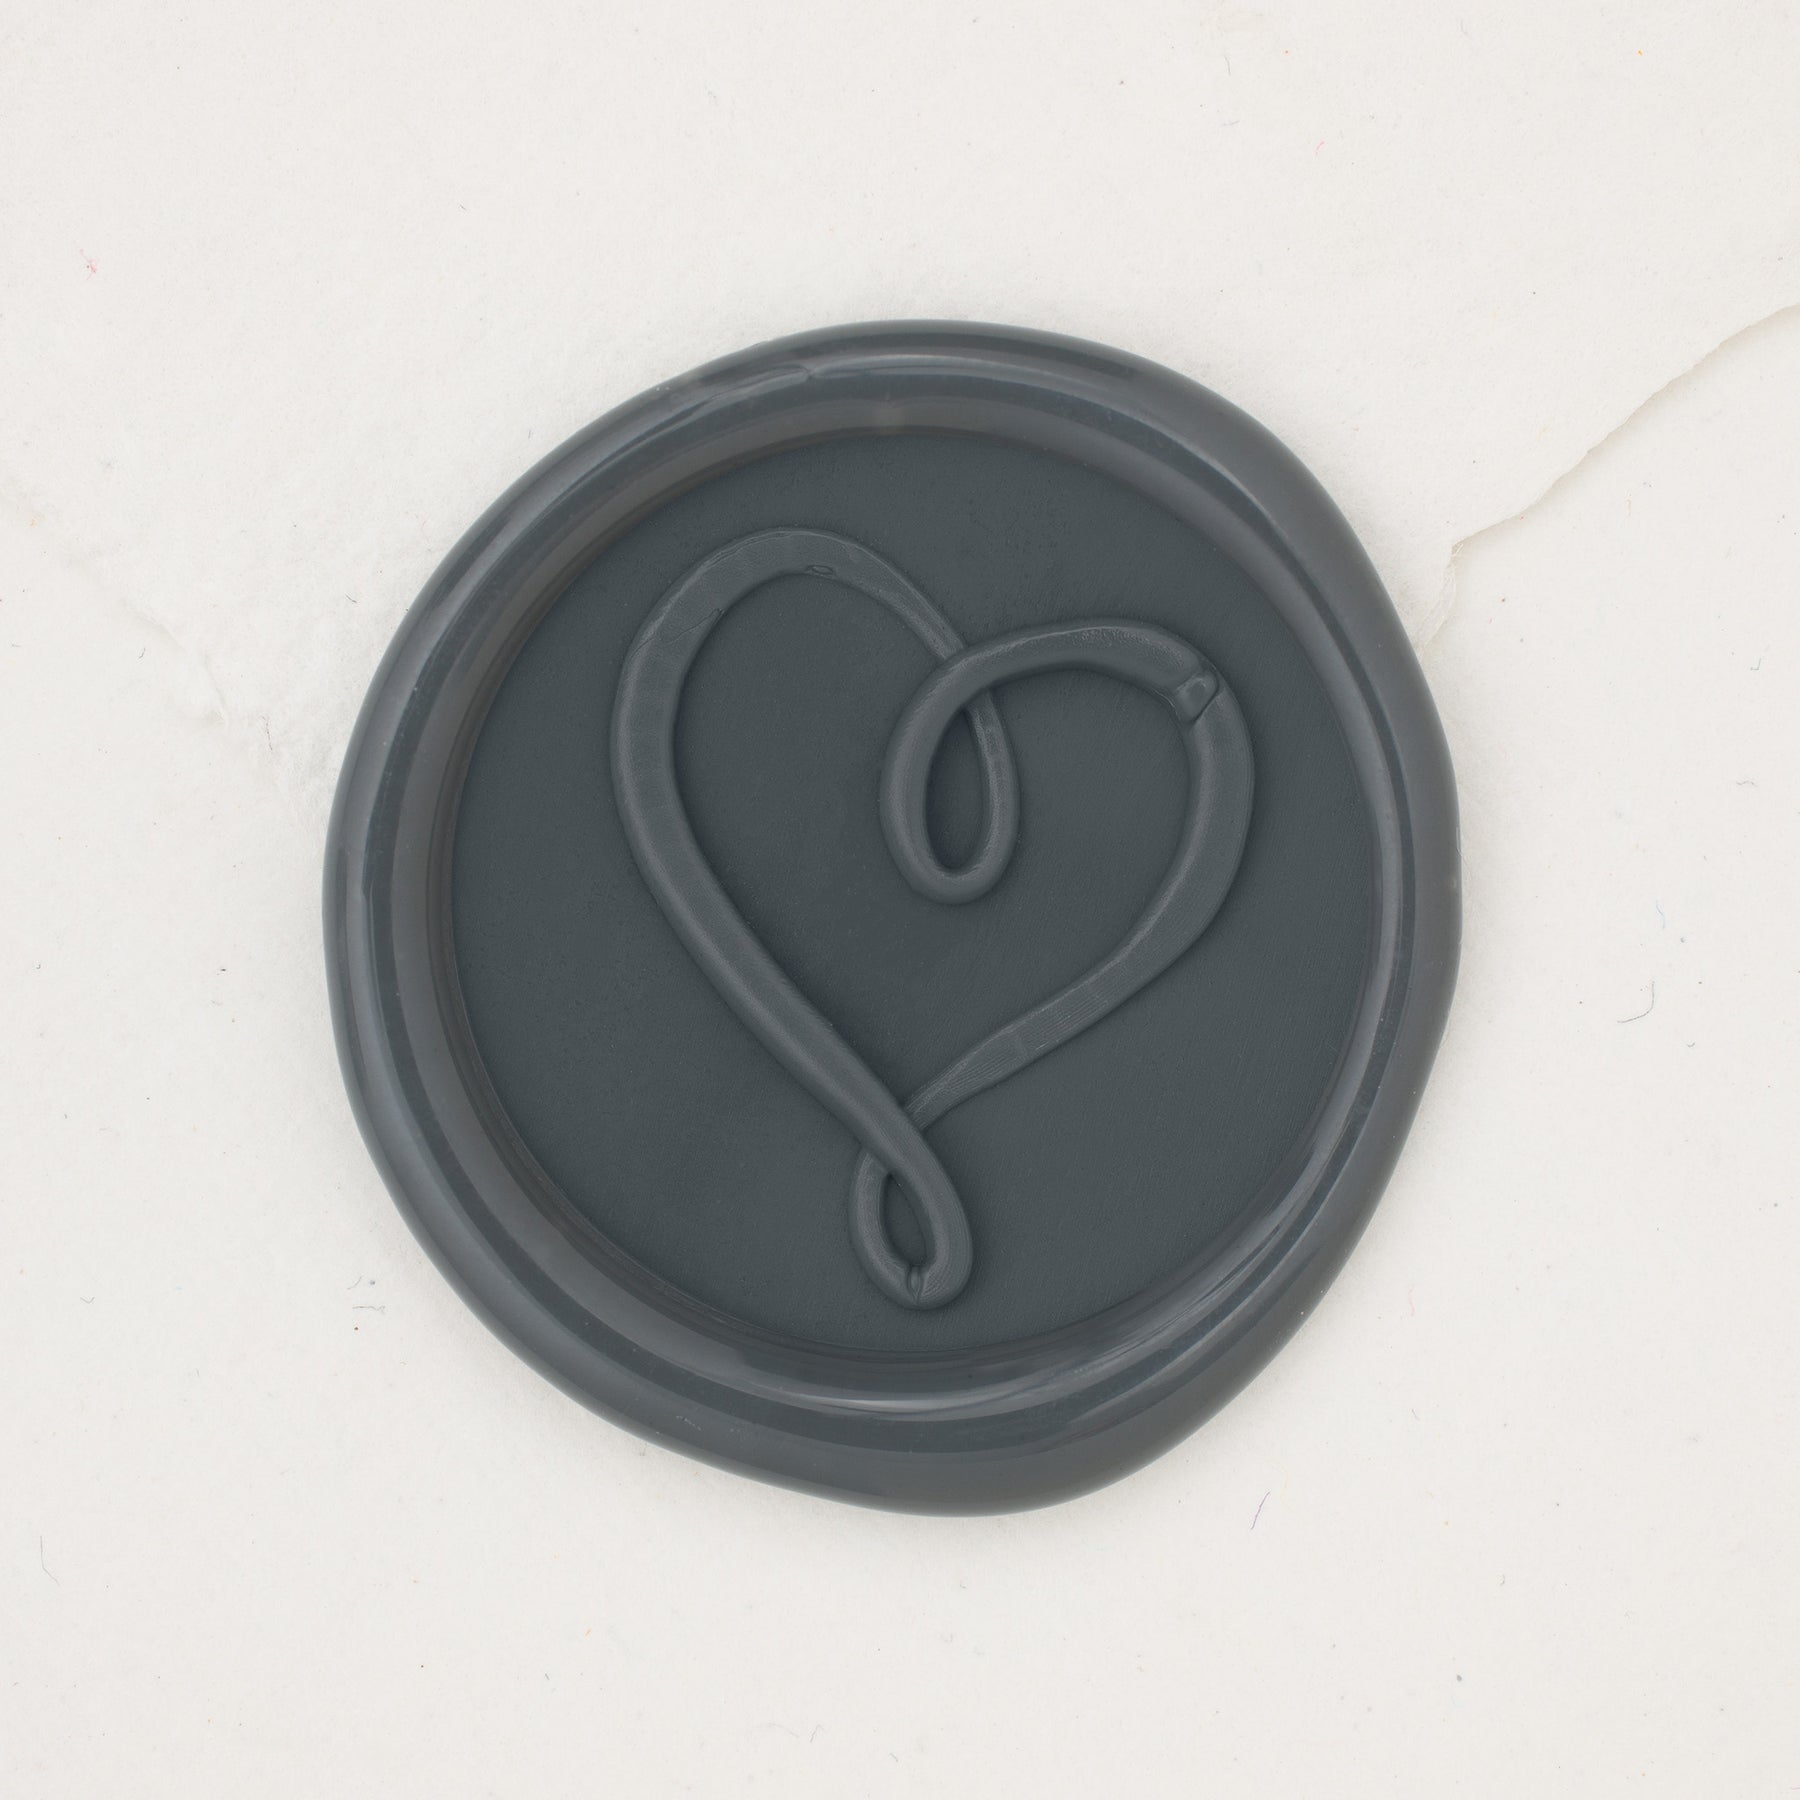 Infinity Heart Adhesive Wax Seal Stickers 25PK - 1 1/4 - 2 Color Choices